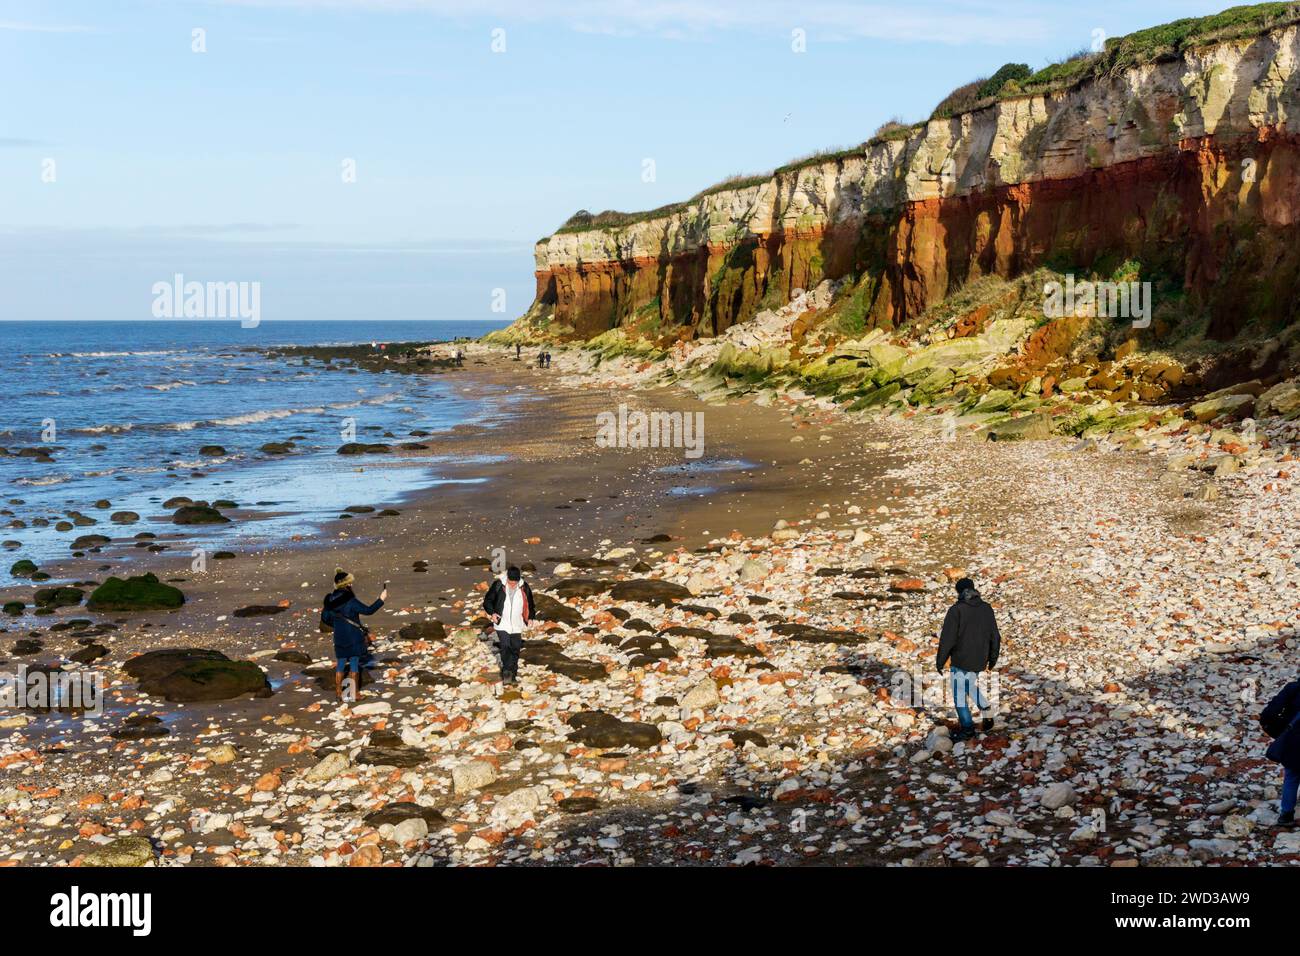 The famous red & white striped cliffs at the east coast seaside town of Hunstanton in Norfolk. Stock Photo